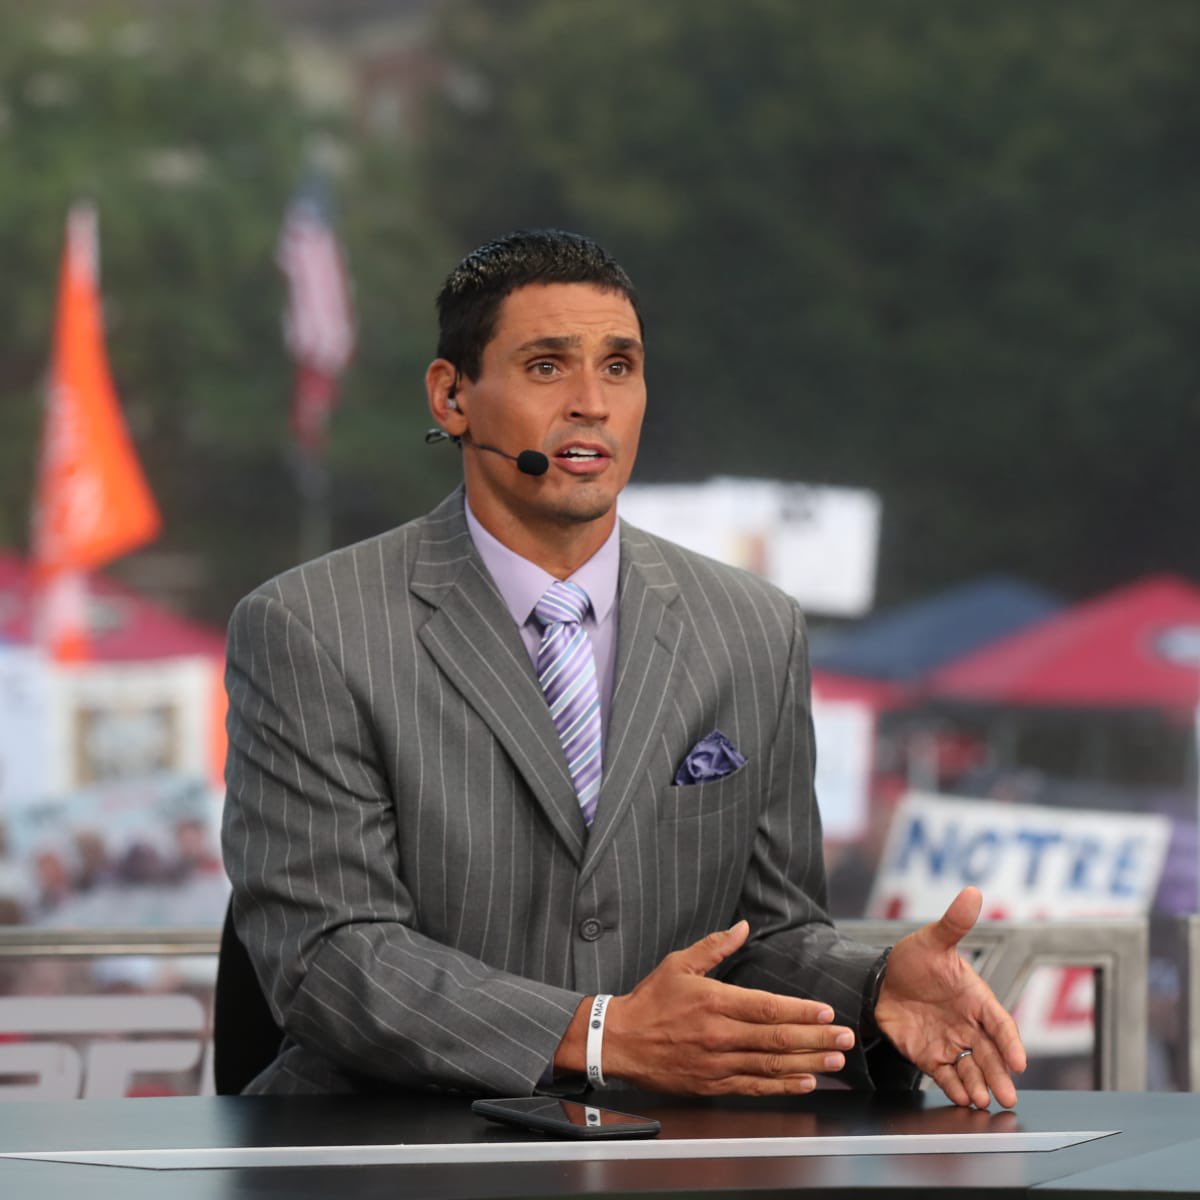 Saturdays won’t be the same without David Pollack

ESPN has lost their mind